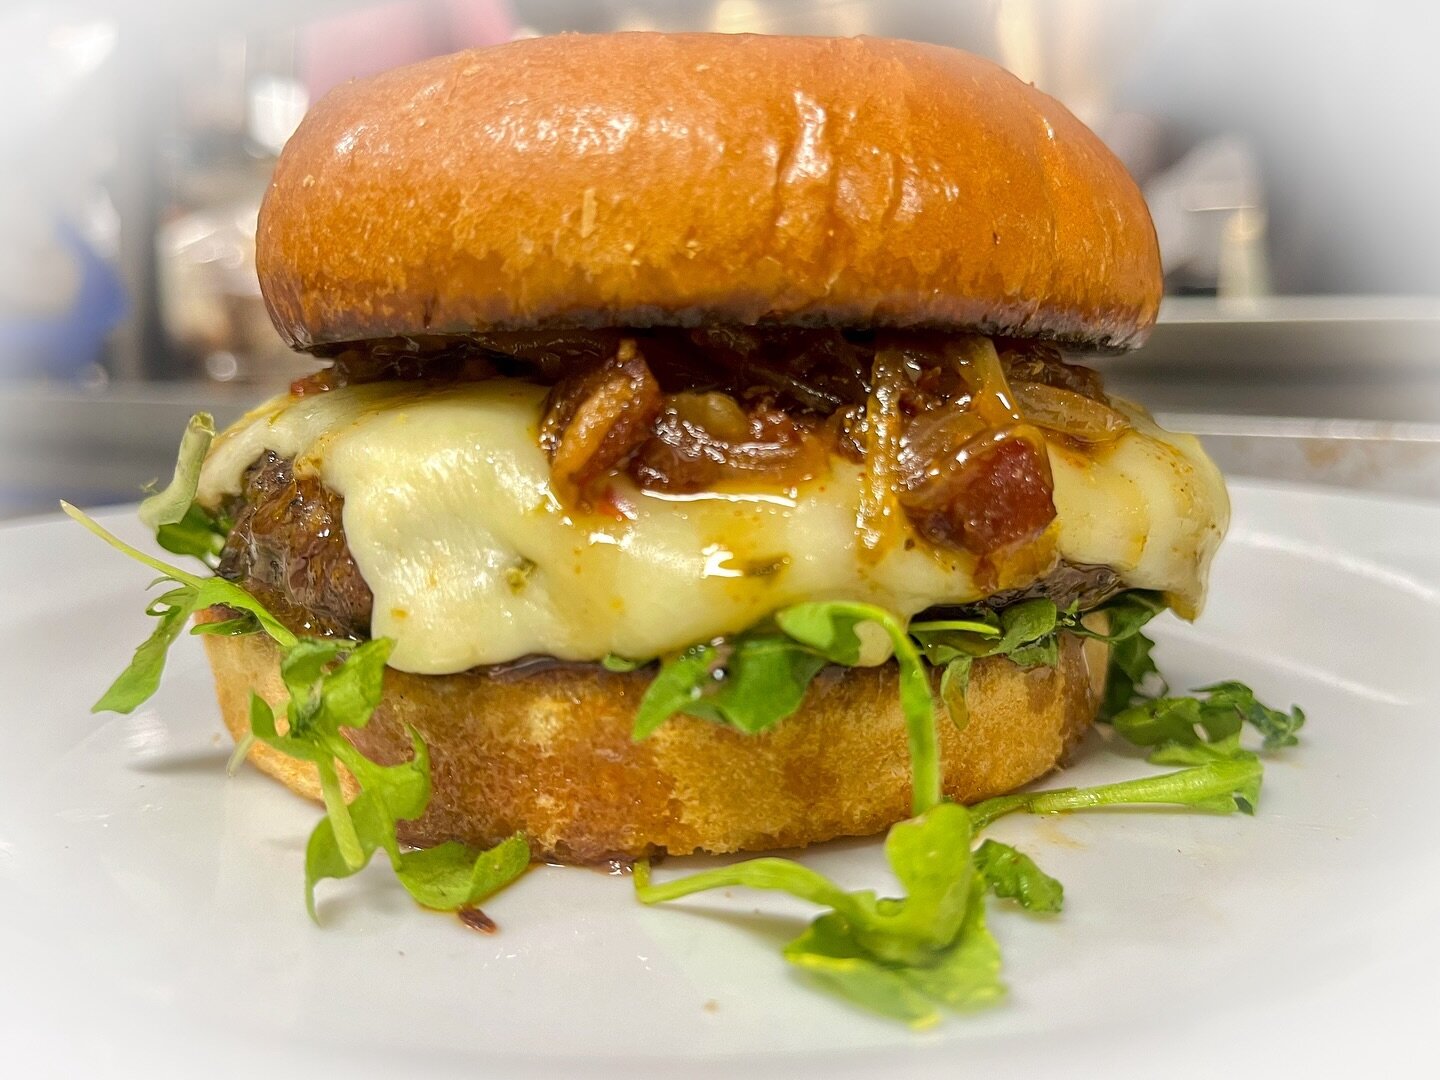 .
&bull;&bull;BACON JAM BURGER 🥓🍇🍔

&bull;&bull;8oz Patty with Arugula, pepper jack cheese, and Bacon onion jam. Served with your choice of a side!! This is our burger special all weekend! 

#burgeroftheweek #pawleysisland #baconjam #quigleyspinta